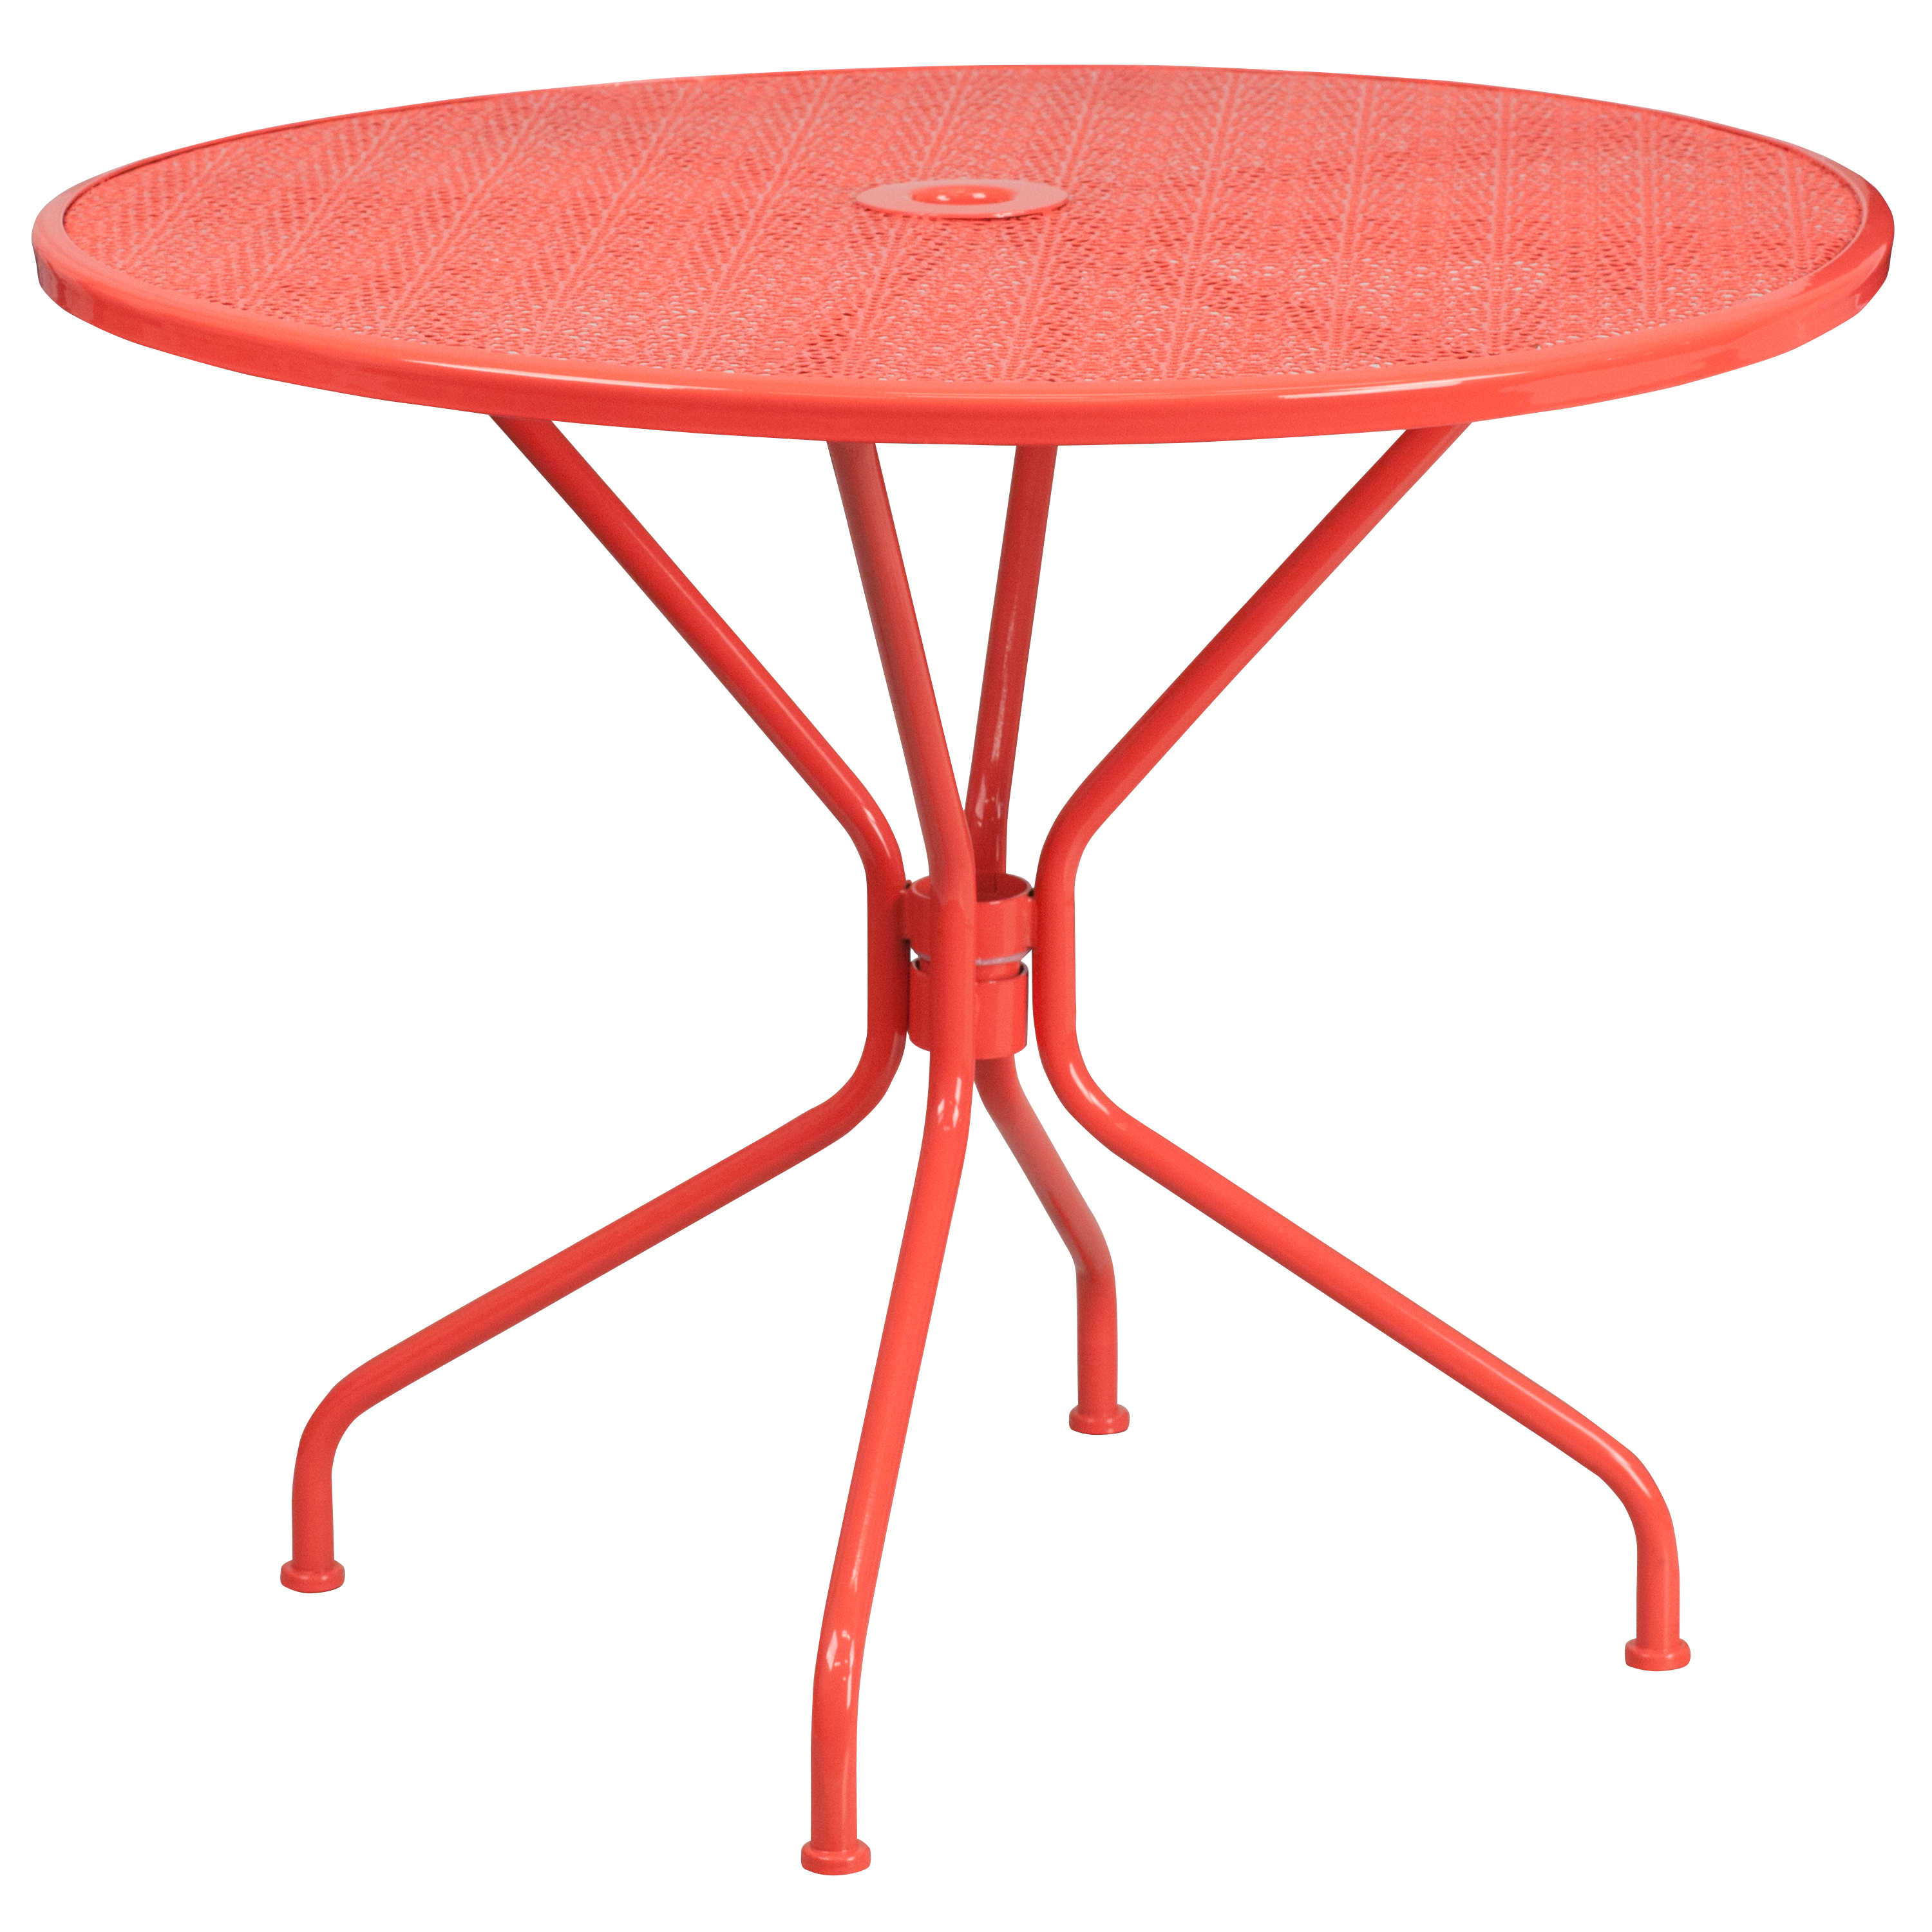 Flash Furniture Commercial Grade 35.25" Round Coral Indoor-Outdoor Steel Patio Table Set with 4 Round Back Chairs - image 4 of 5